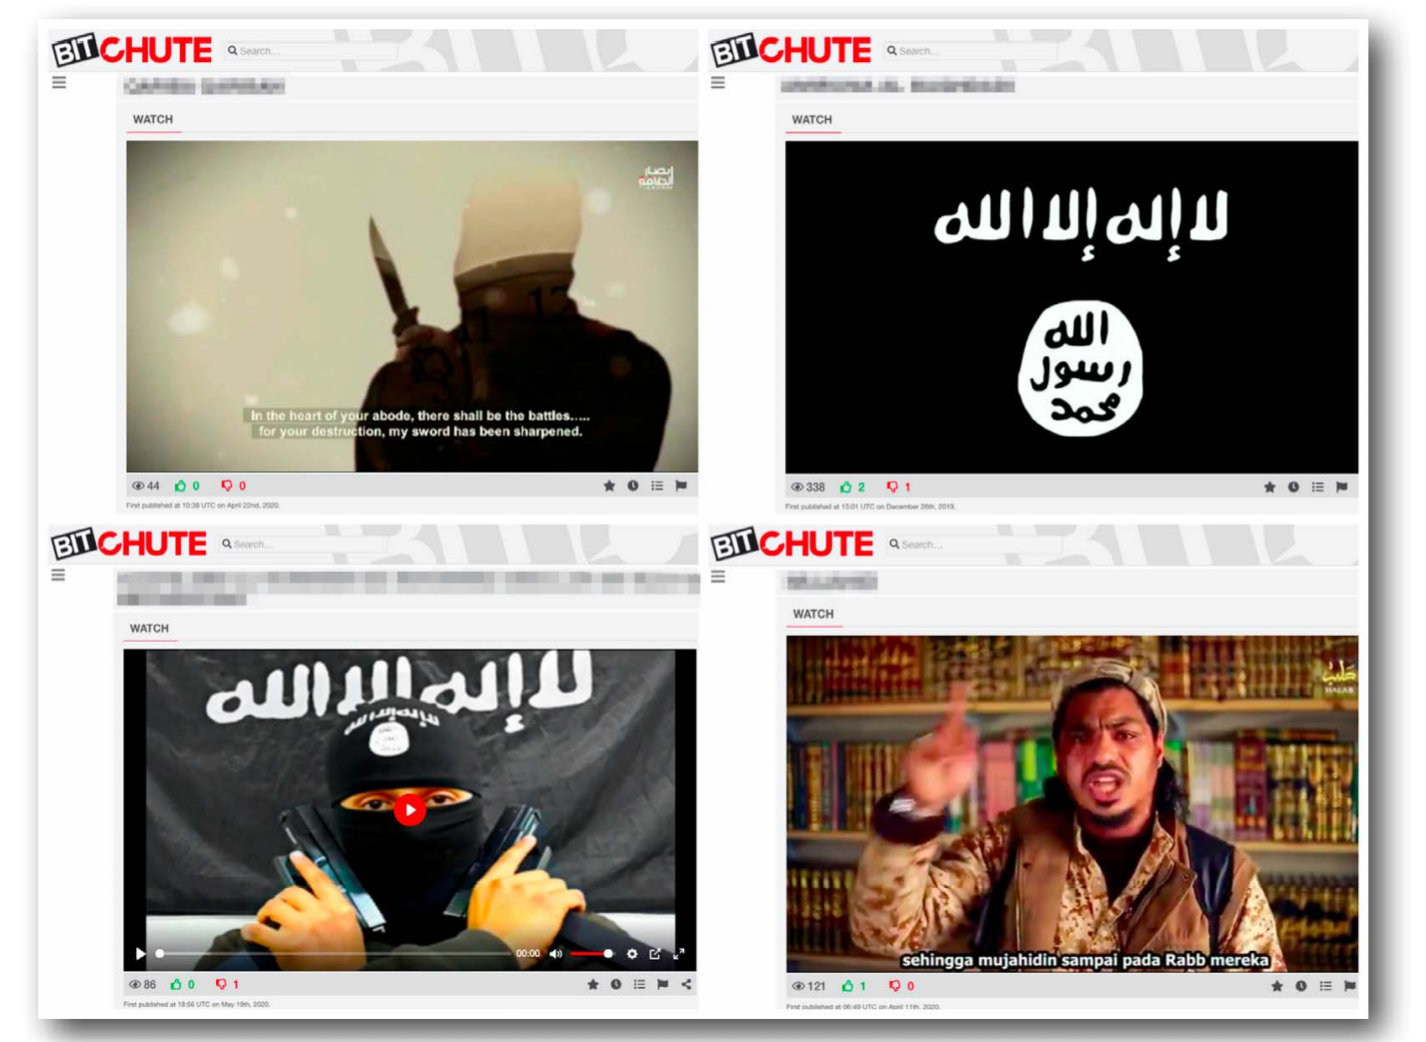 Isis propaganda videos available on BitChute at the time of Hope Not Hate’s research